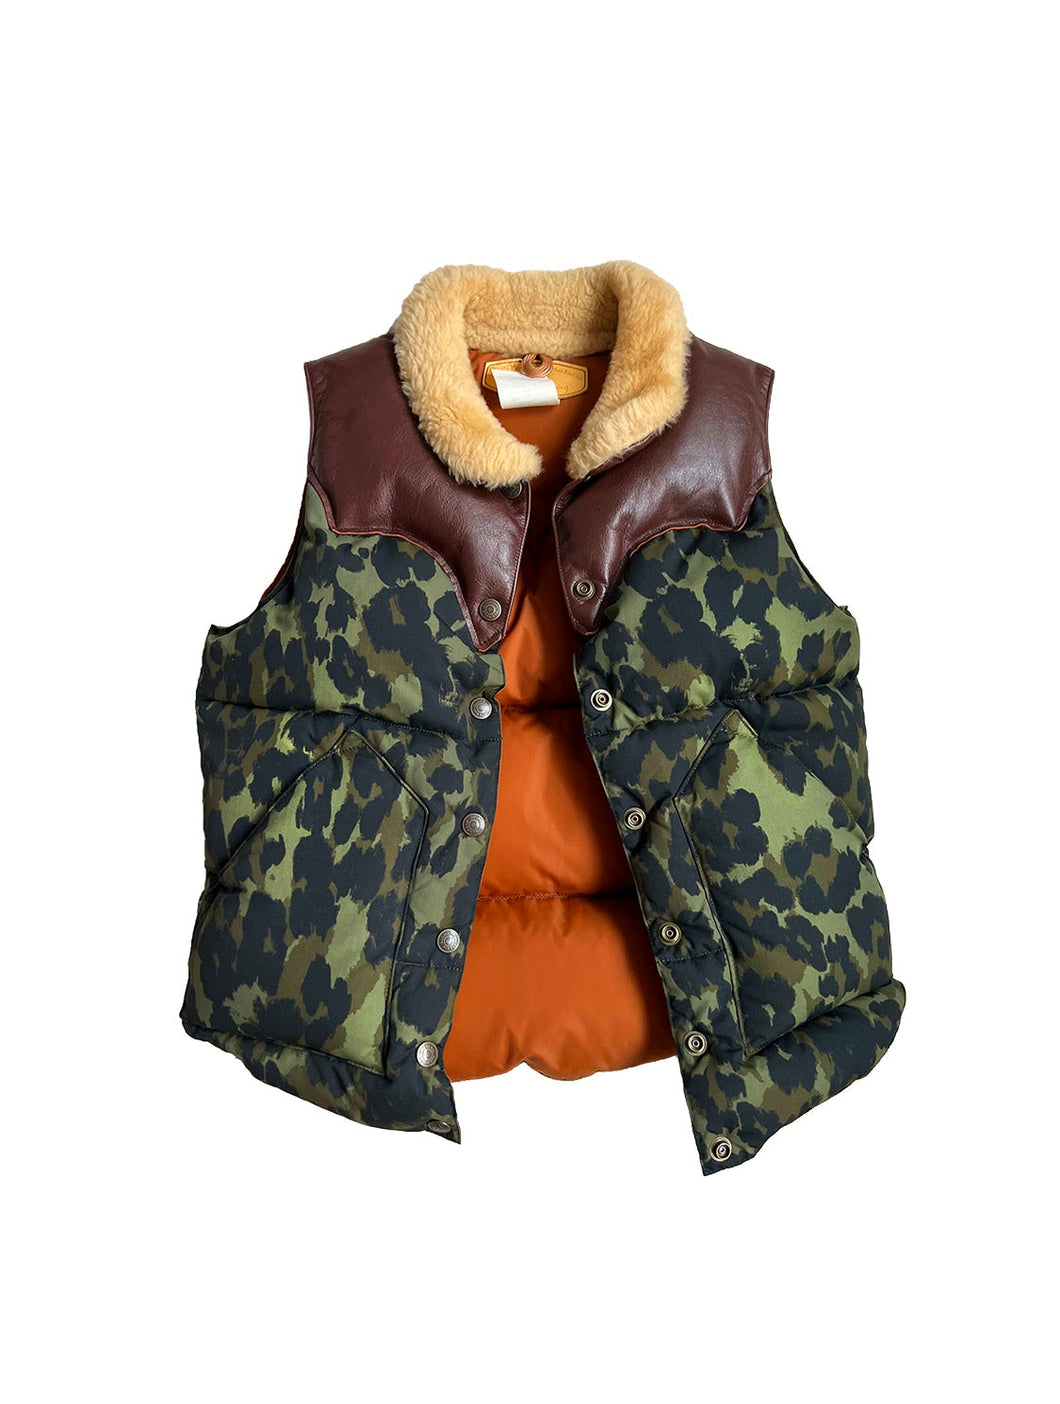 Hysteric Glamour Green Camouflage Puffer Vest